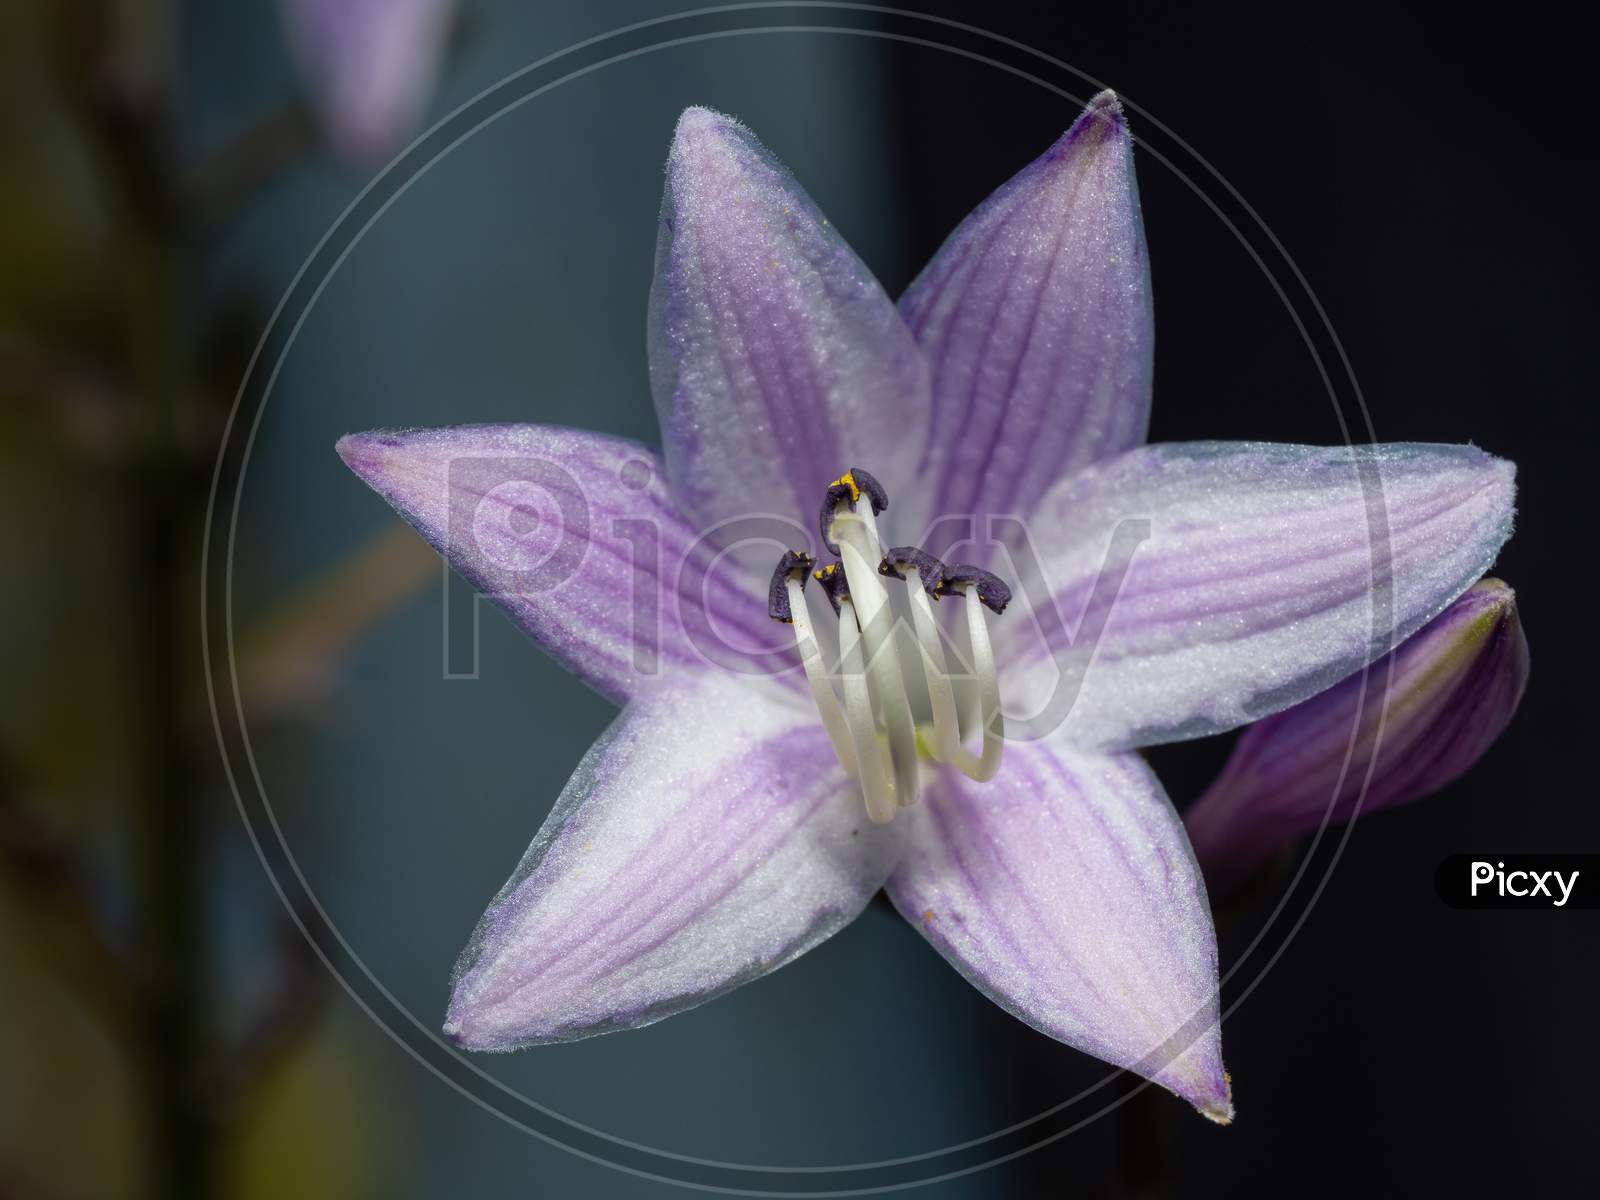 Close-Up Of Hosta Or Funkia Flower In Blossom.